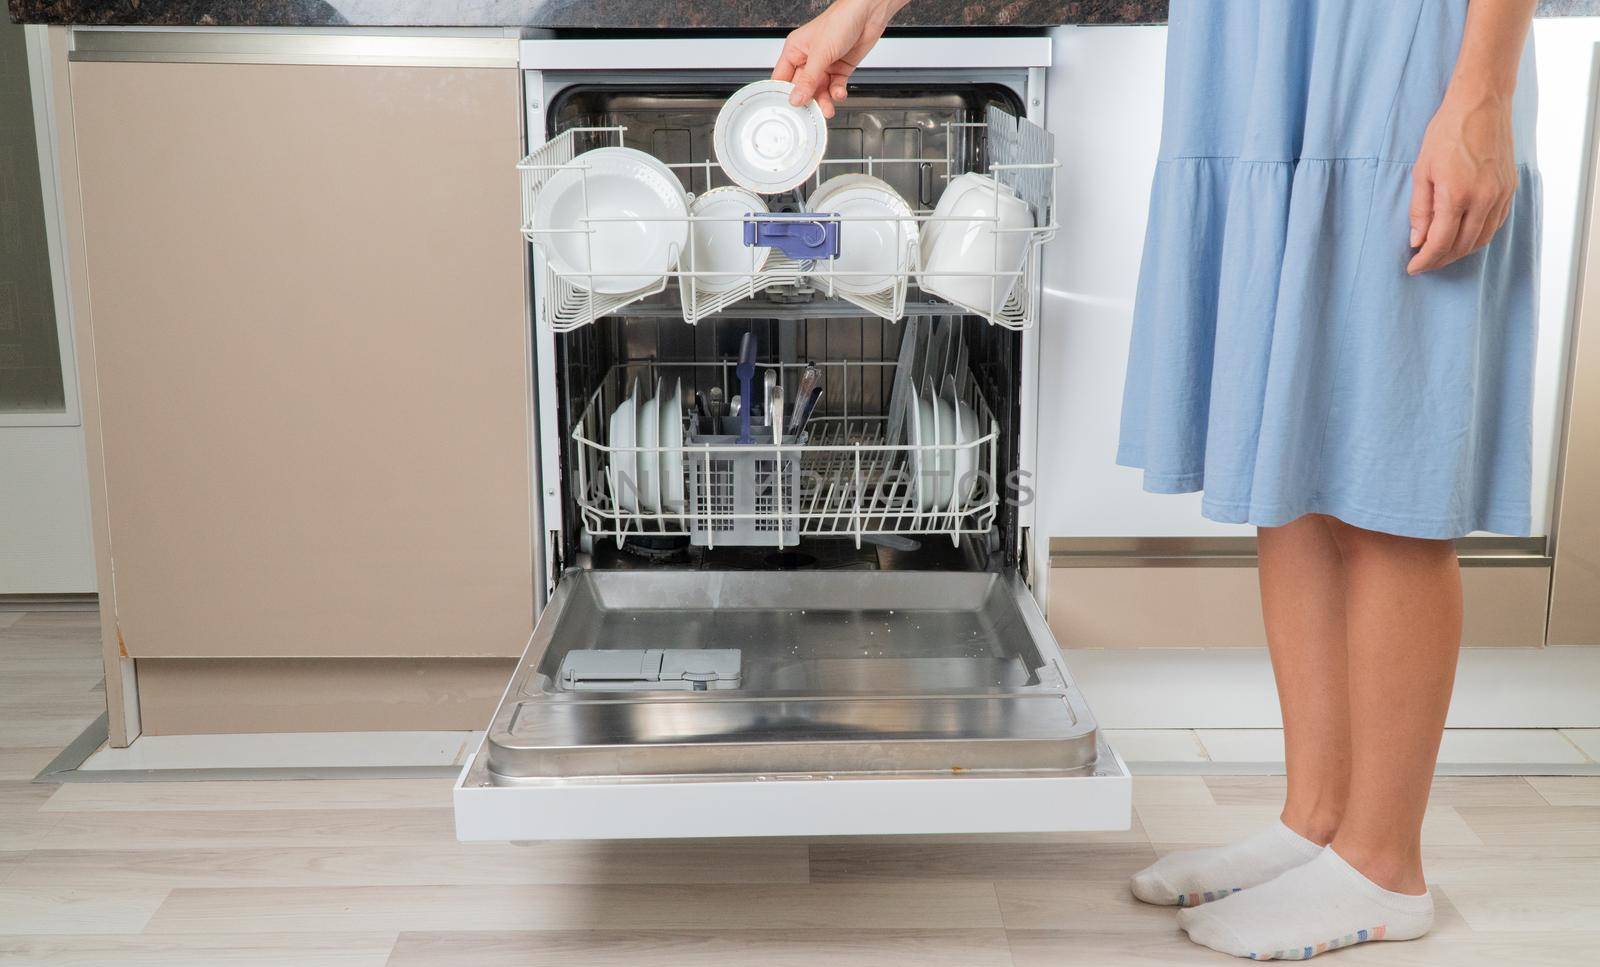 Housewife removes clean dishes from dishwasher front view